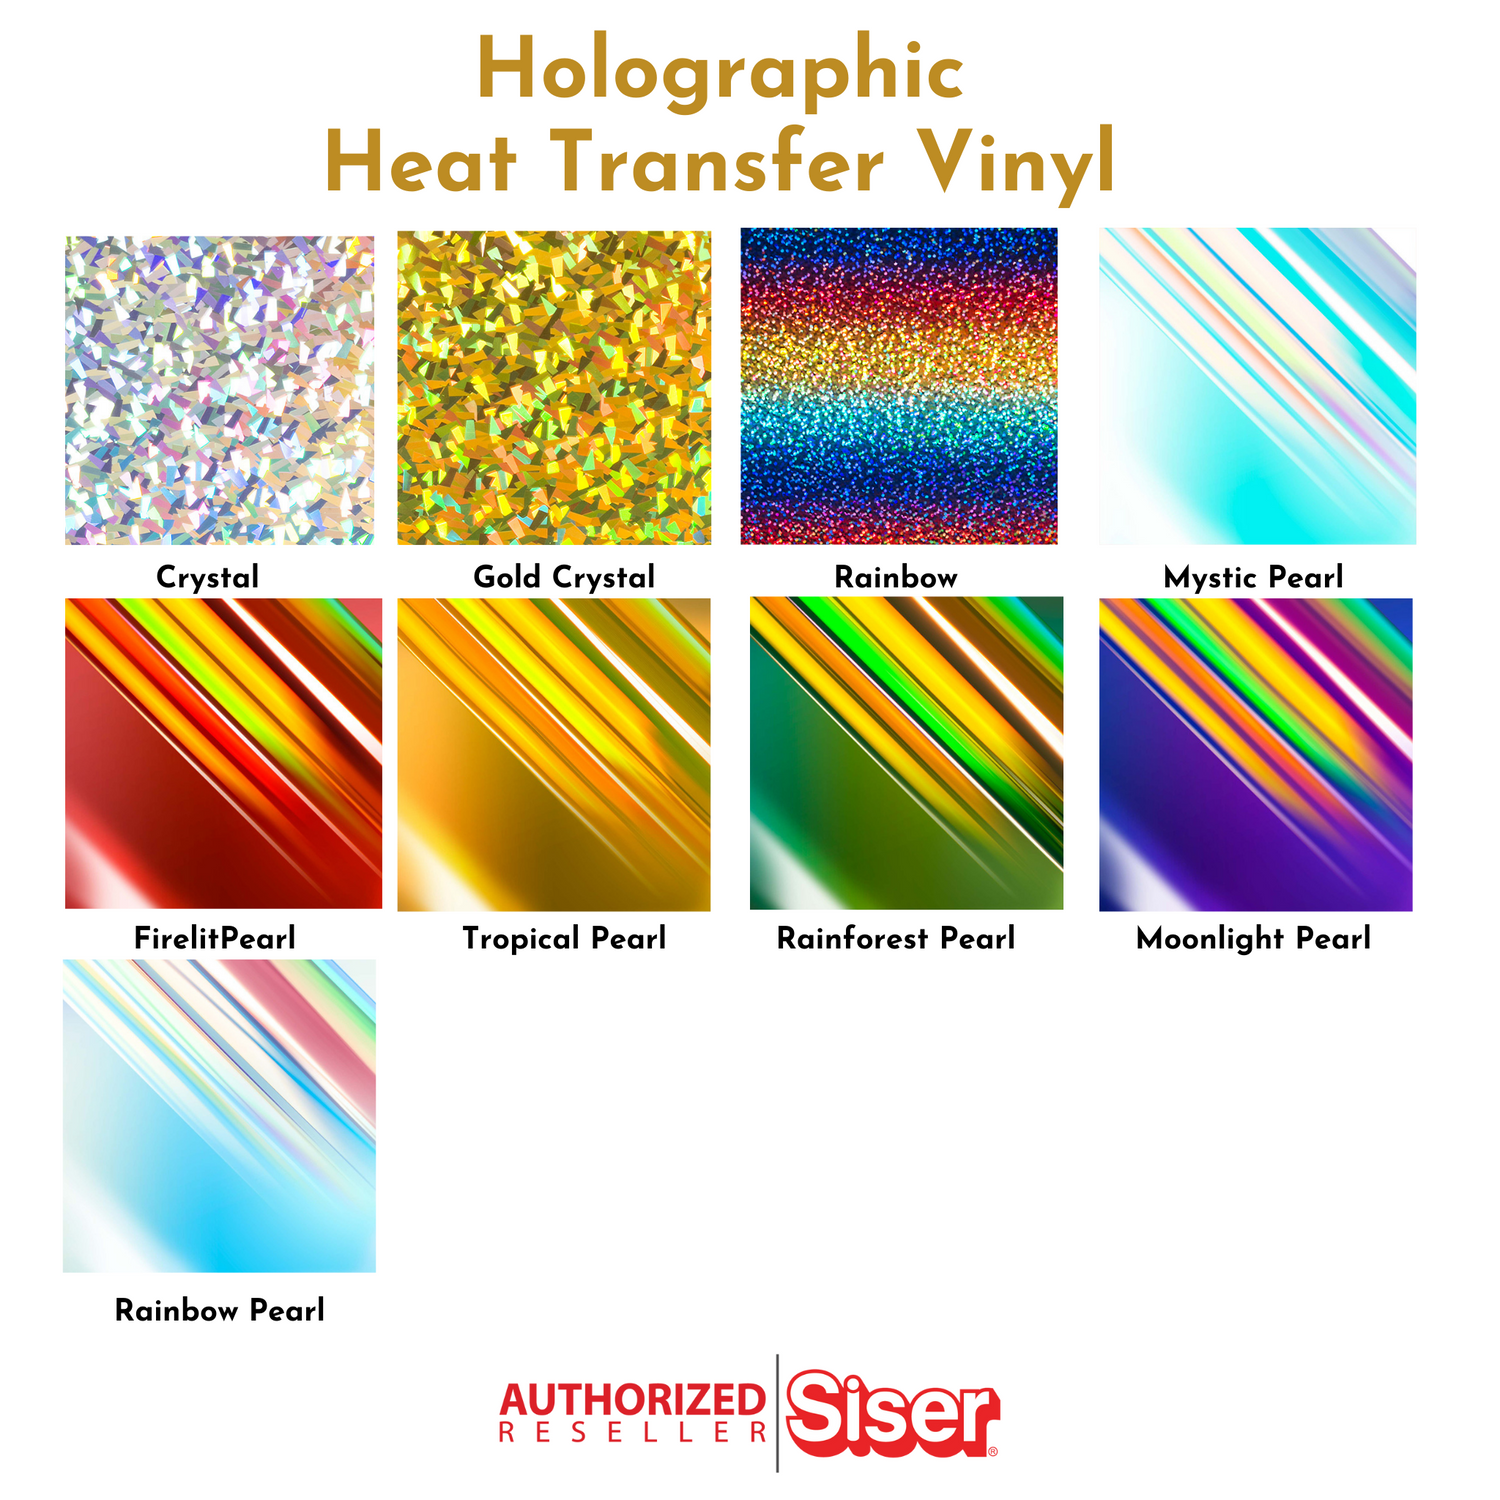 Holographic Heat Transfer Sheets - Standout Vinyl